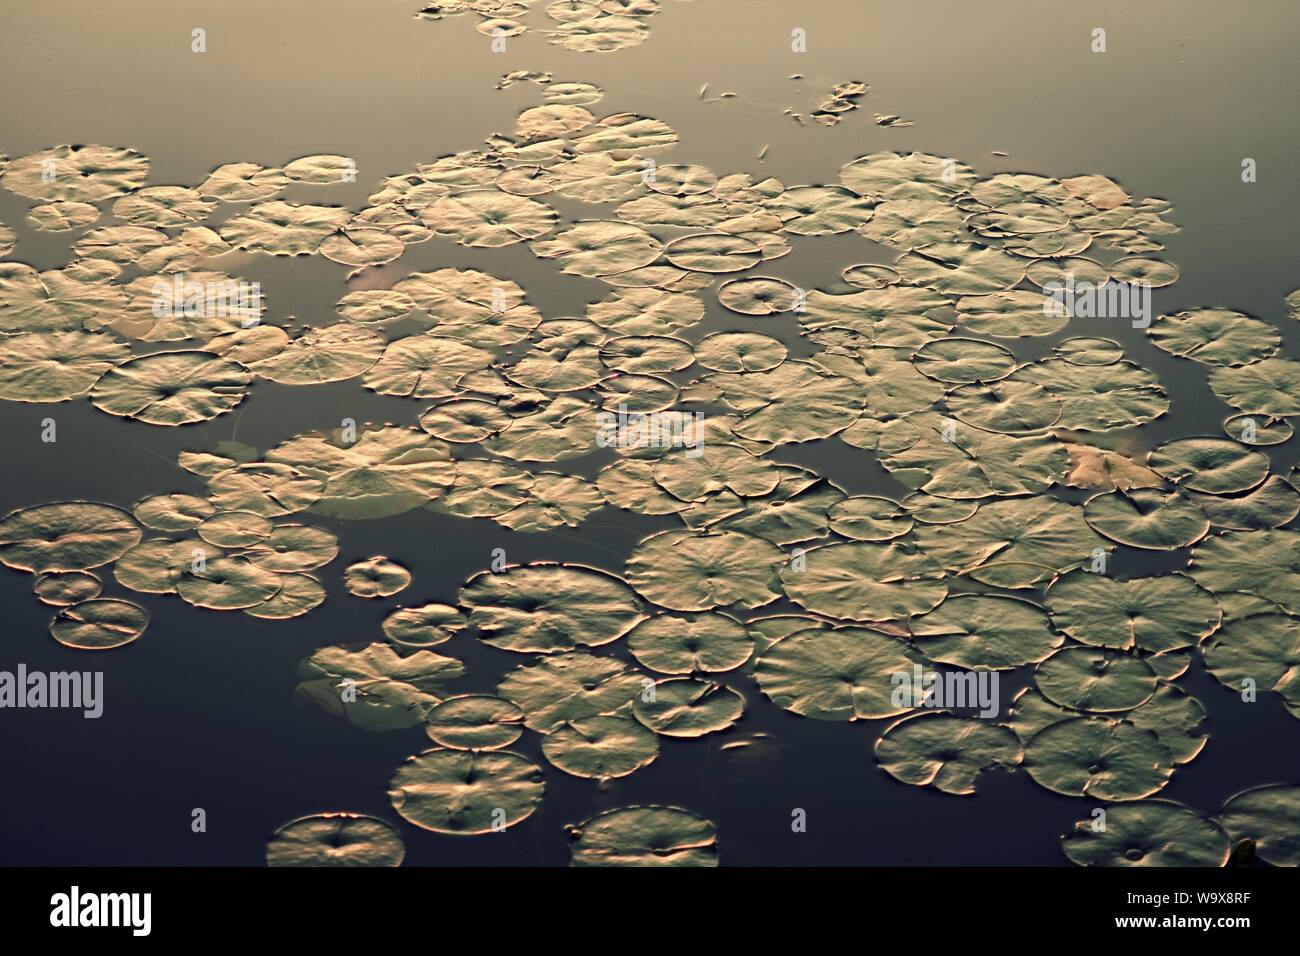 Waterlily leafs floating on a lake in the sunrise light Stock Photo